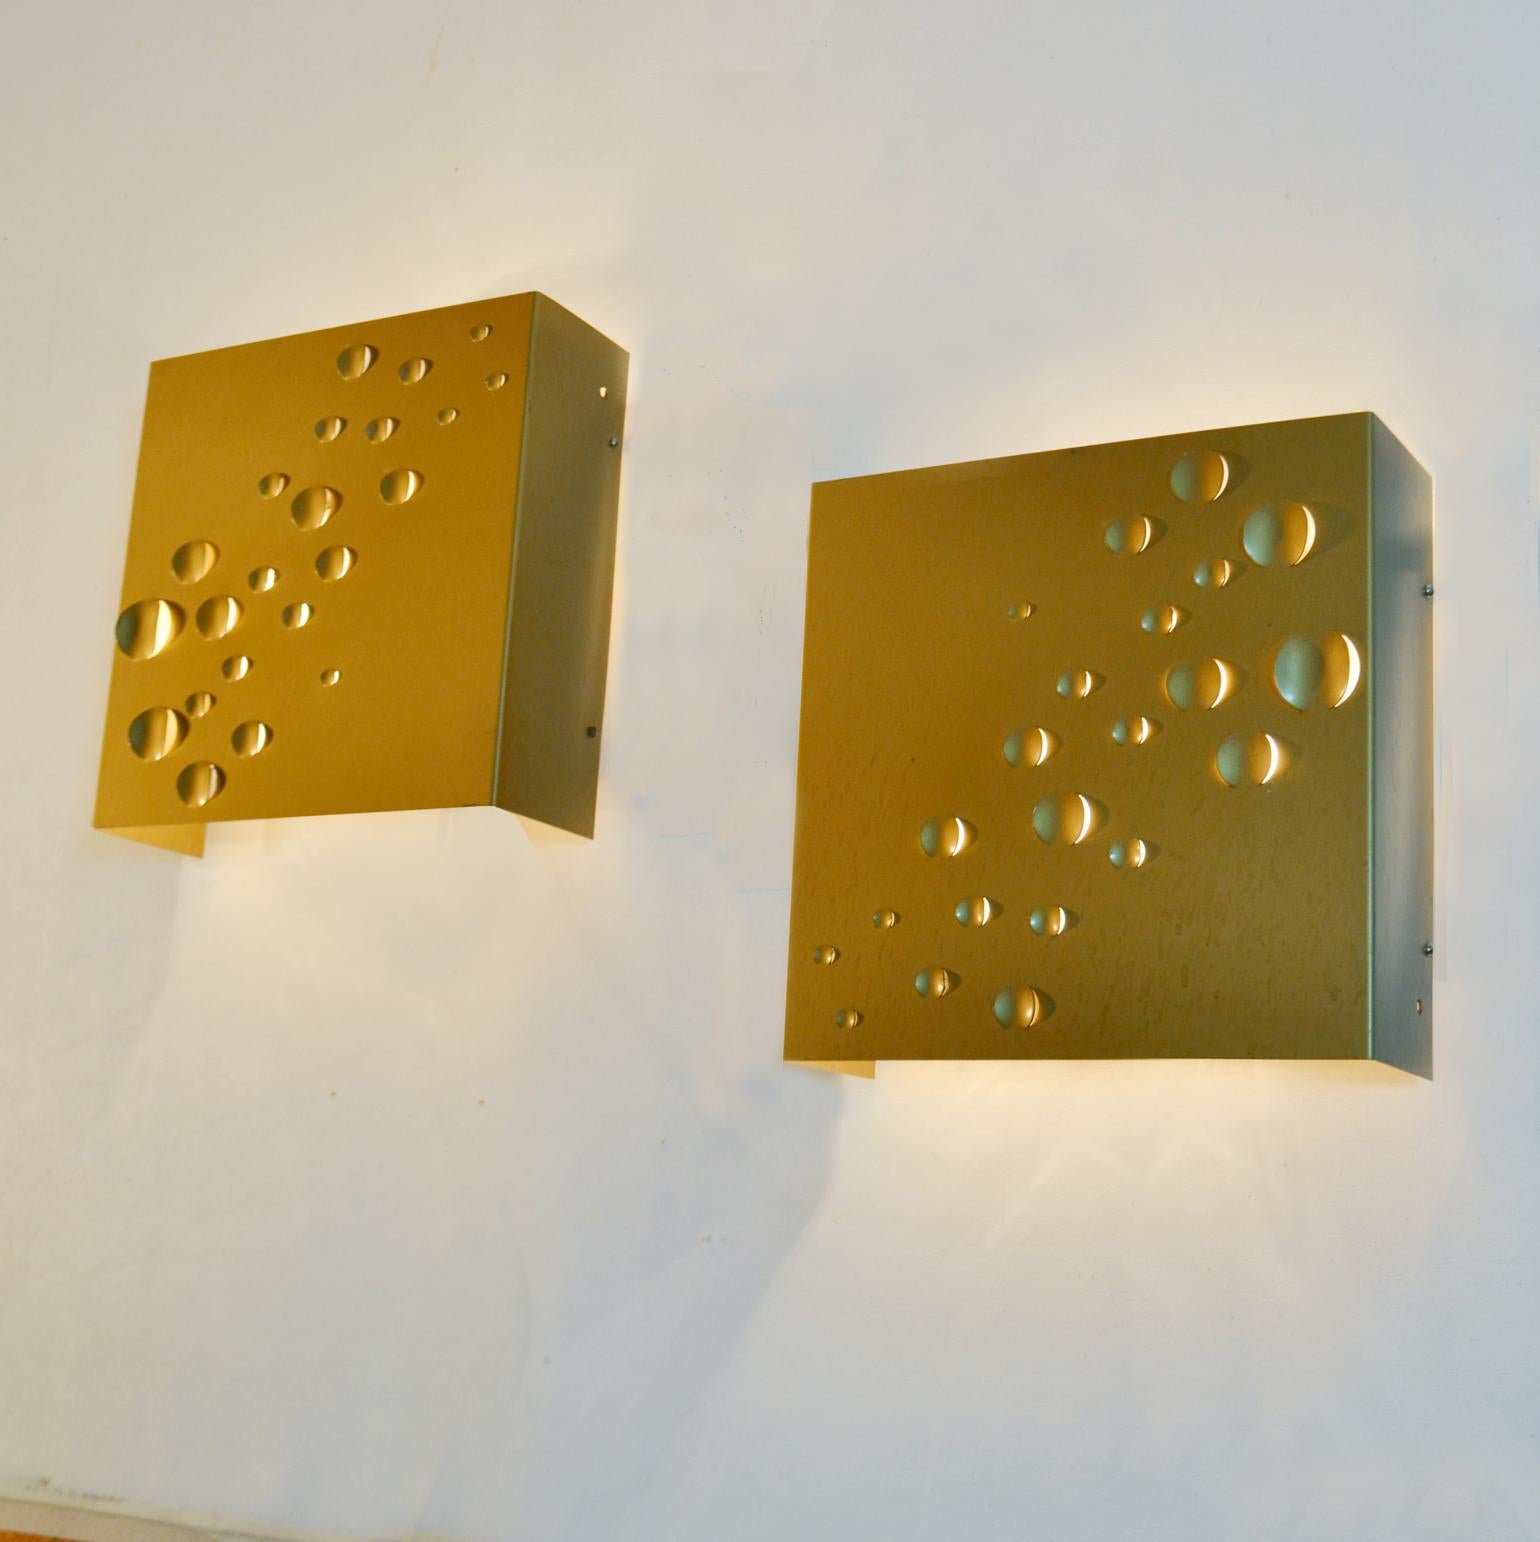 Three pairs of minimalist wall lamps in gold tinted anodized aluminium designed by Jelle Jelles produced by Raak: model number C.1627.
Jelles was a leading architect of the Dutch late Functionalist tradition in the period between 1965-85. During